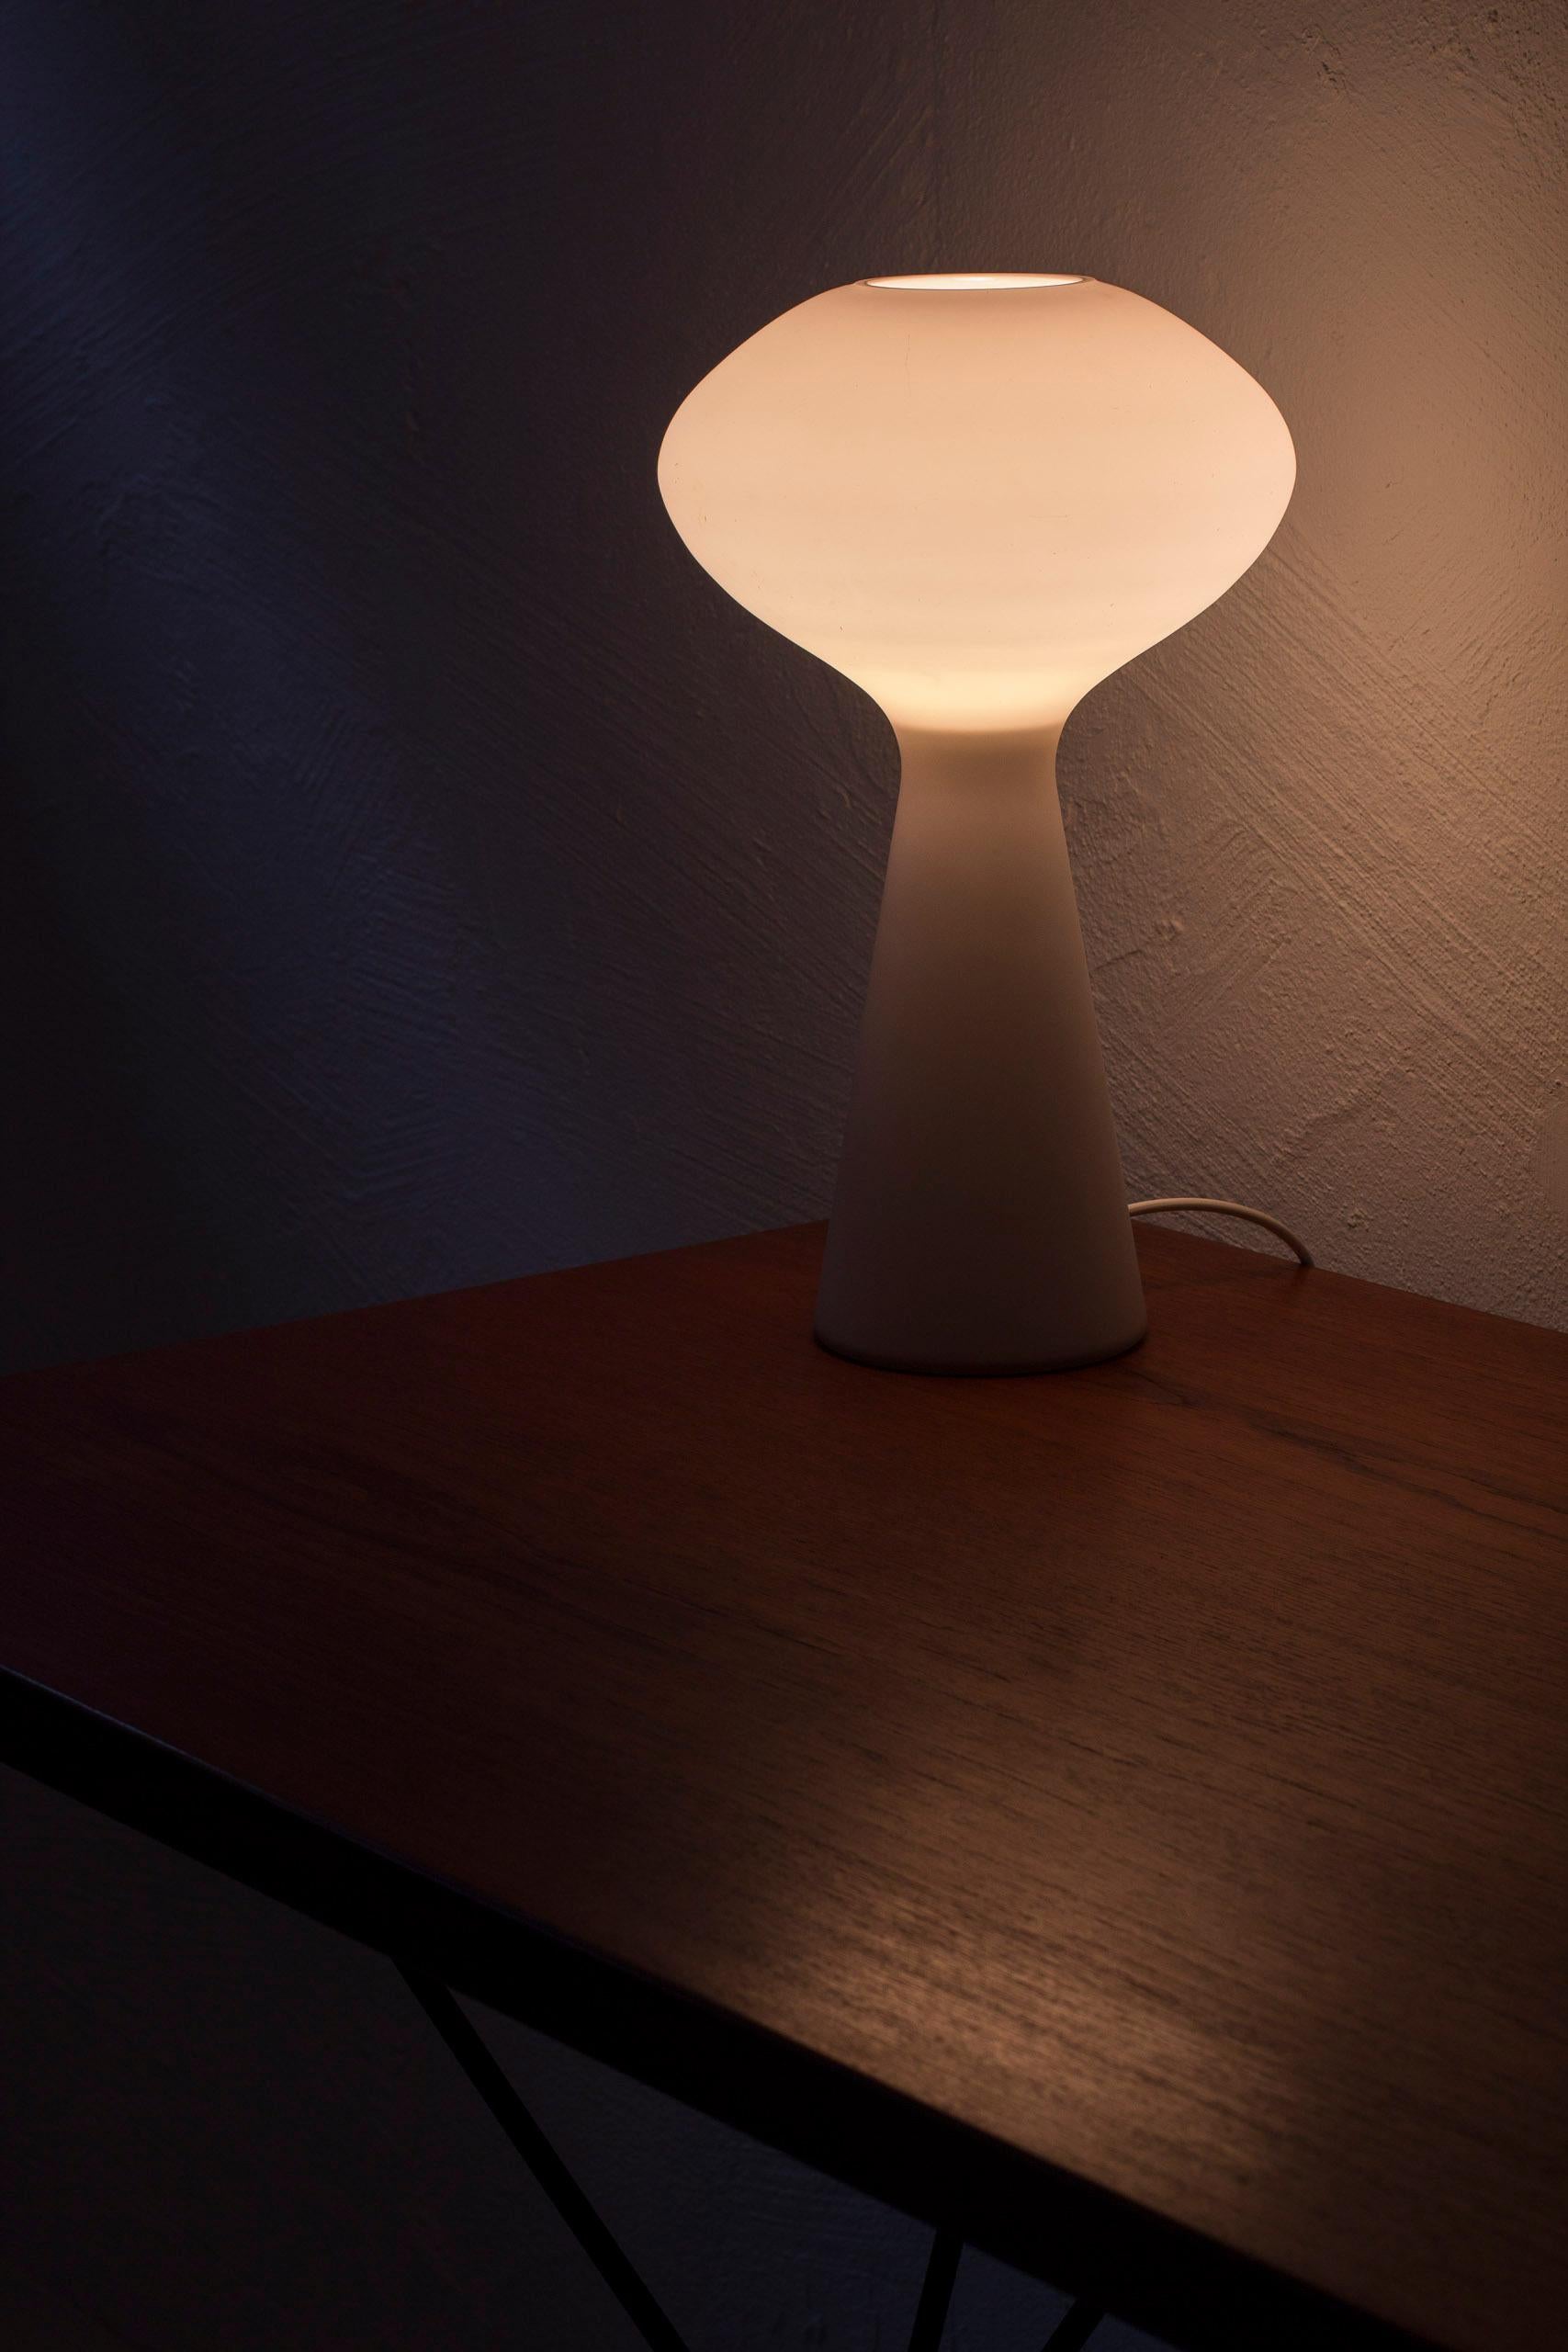 Mid-20th Century Table Lamp by Uno Westerberg for Böhlmarks Lampfabrik, Sweden, 1950s